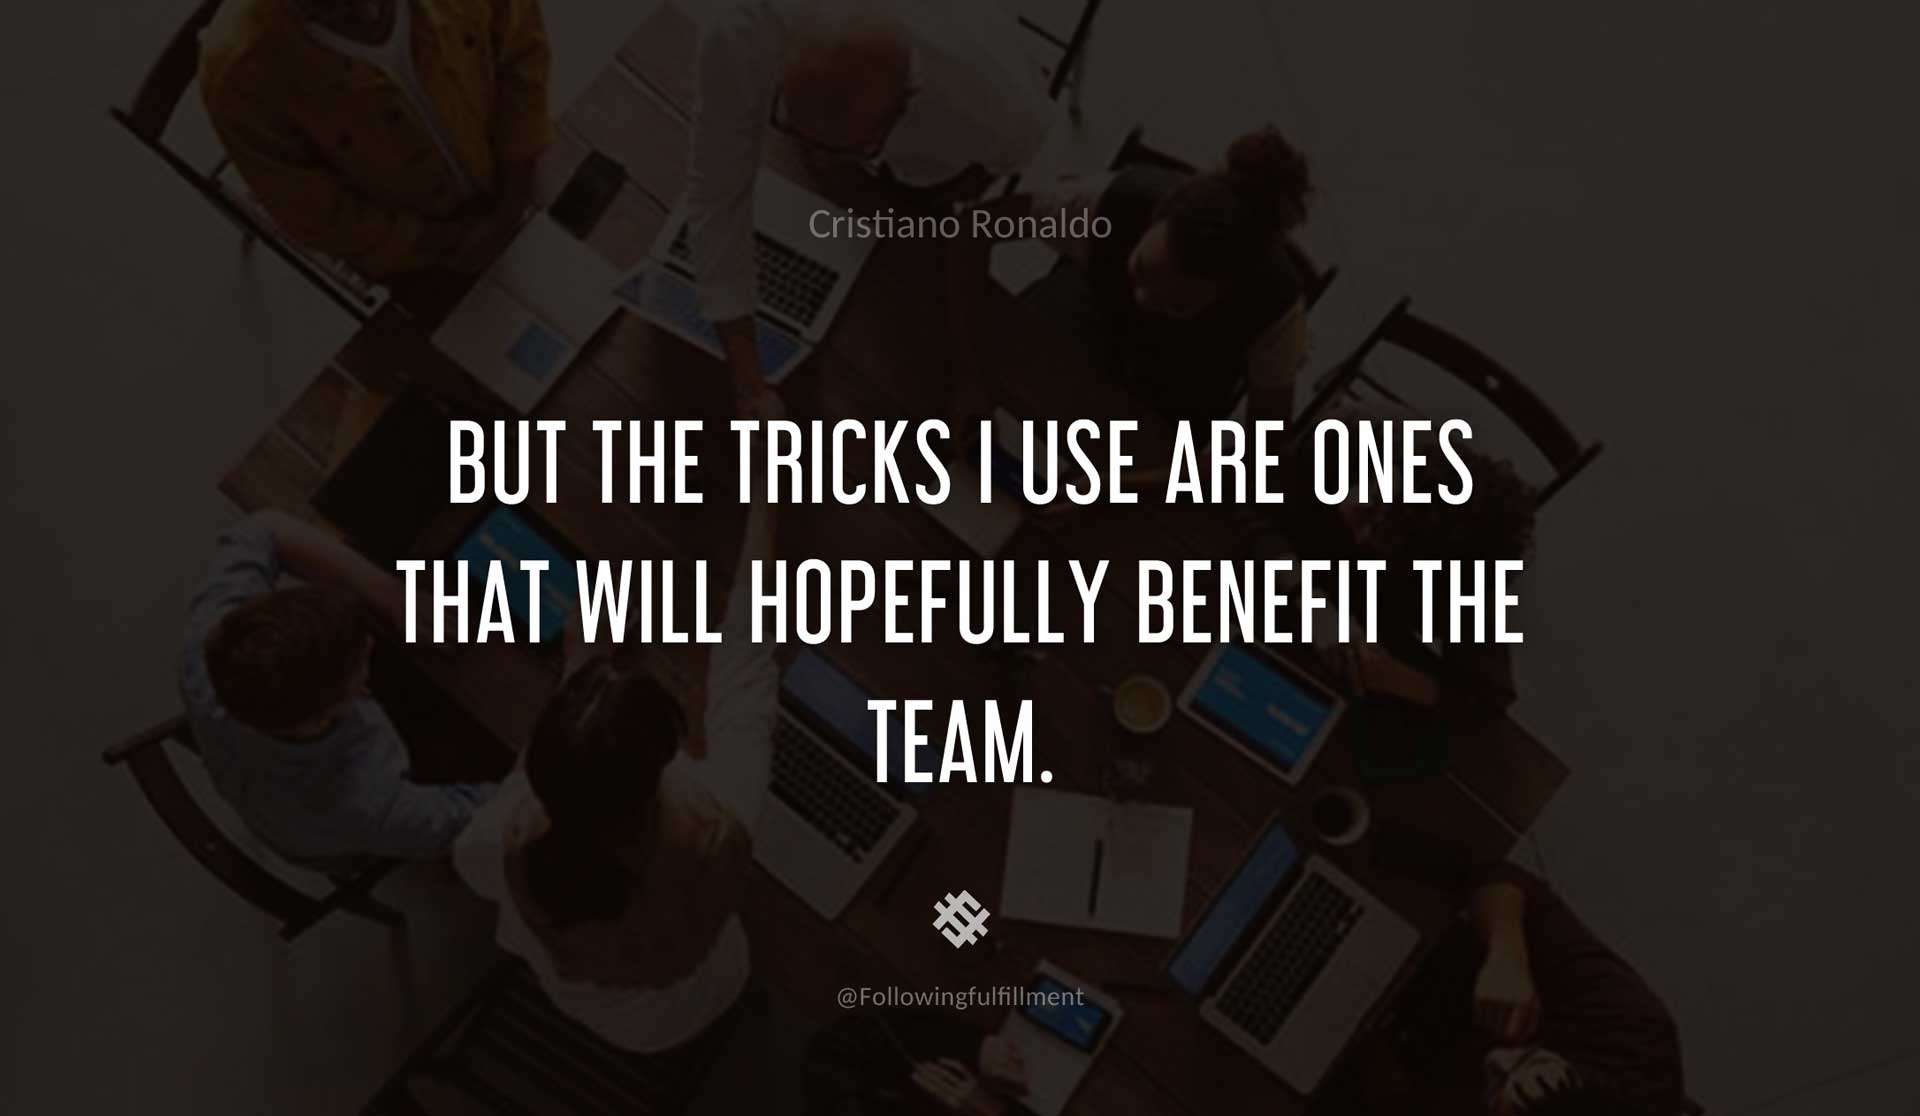 But-the-tricks-I-use-are-ones-that-will-hopefully-benefit-the-team.-CRISTIANO-RONALDO-Quote.jpg